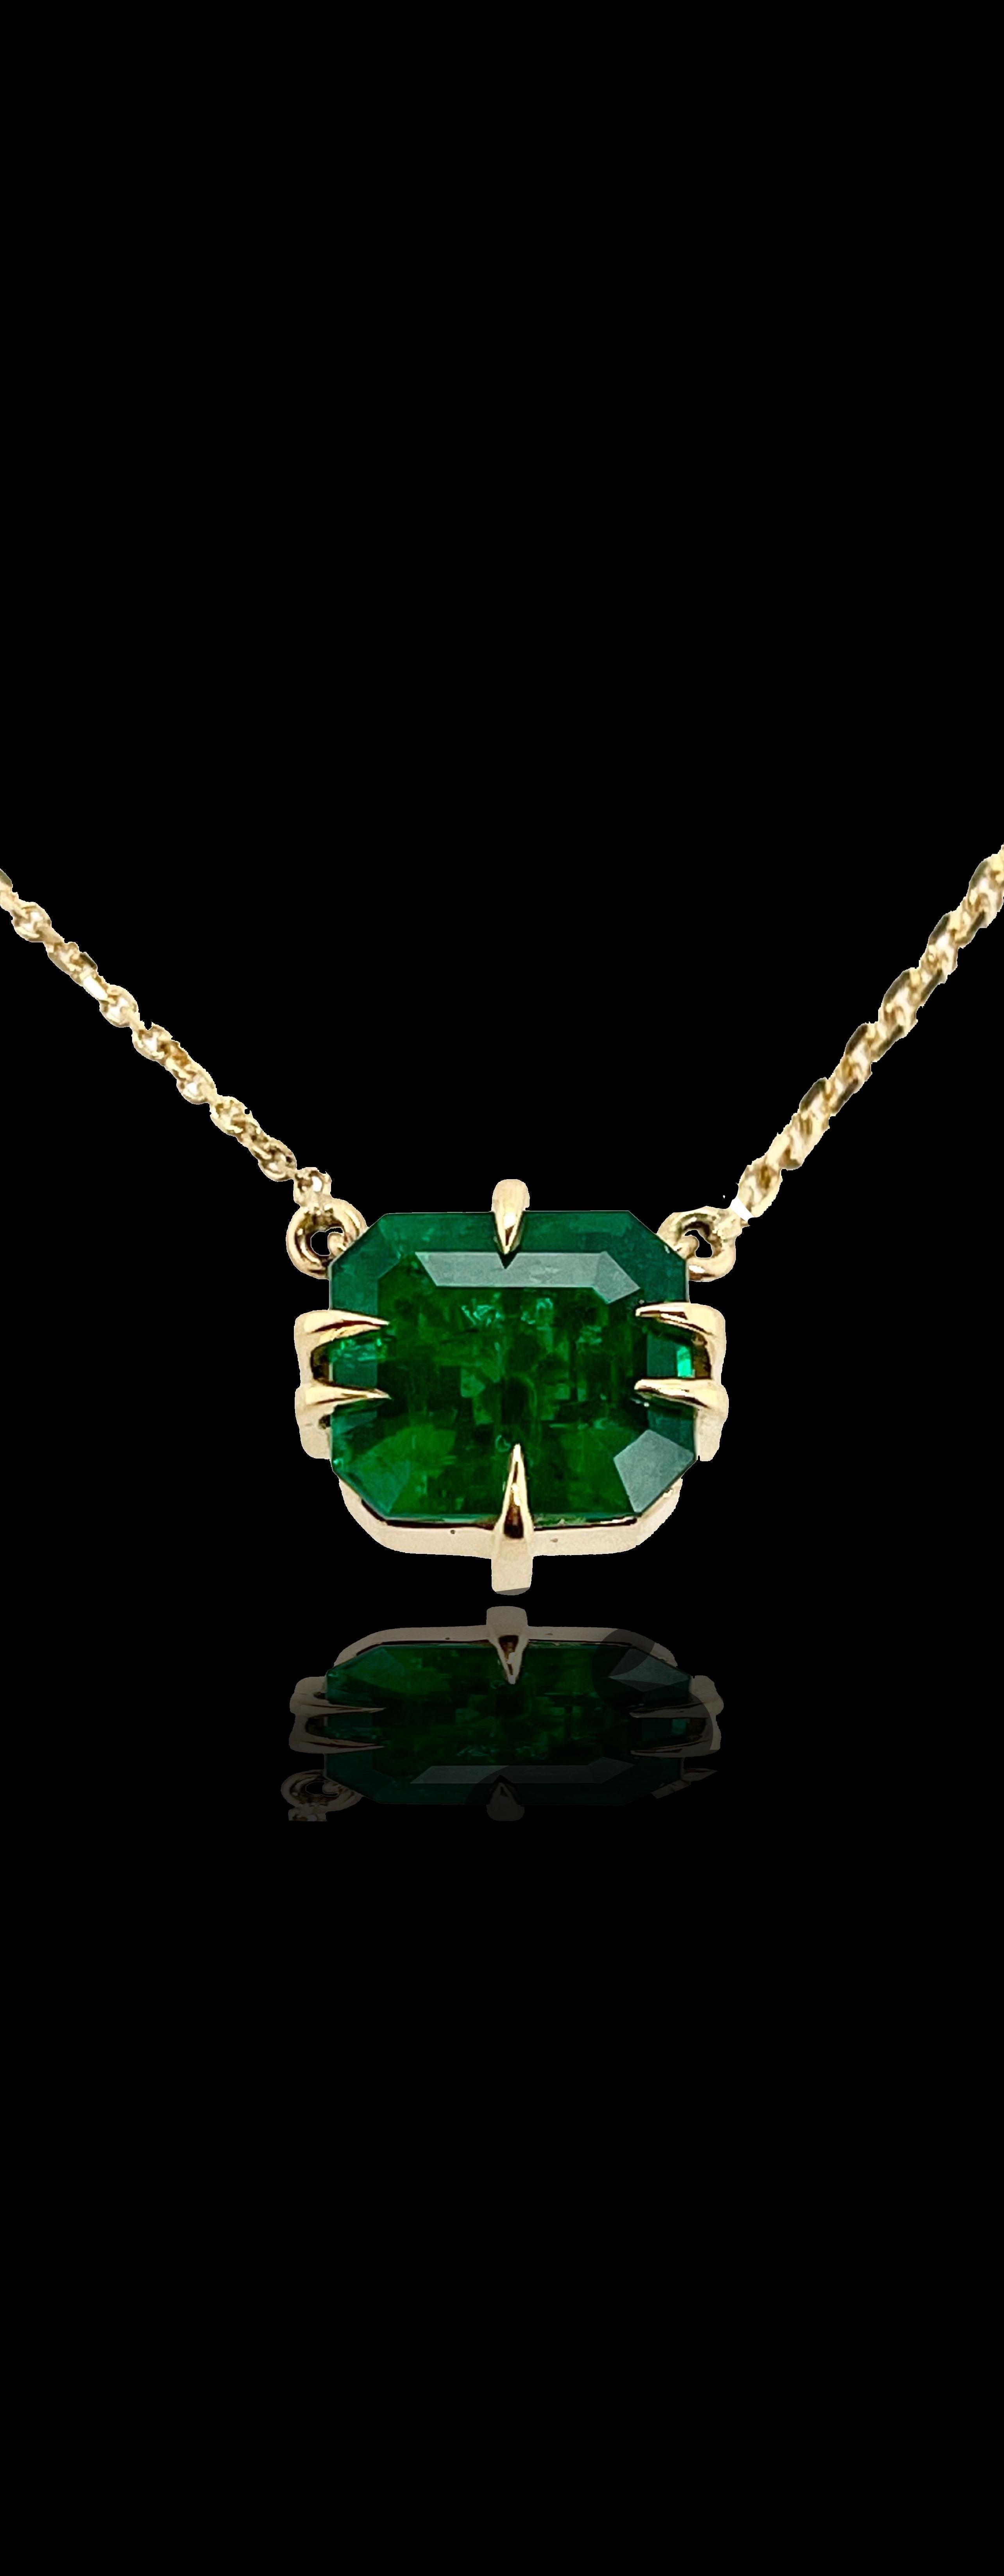 2.26ct Emerald necklace made in 18k yellow gold with chain  6